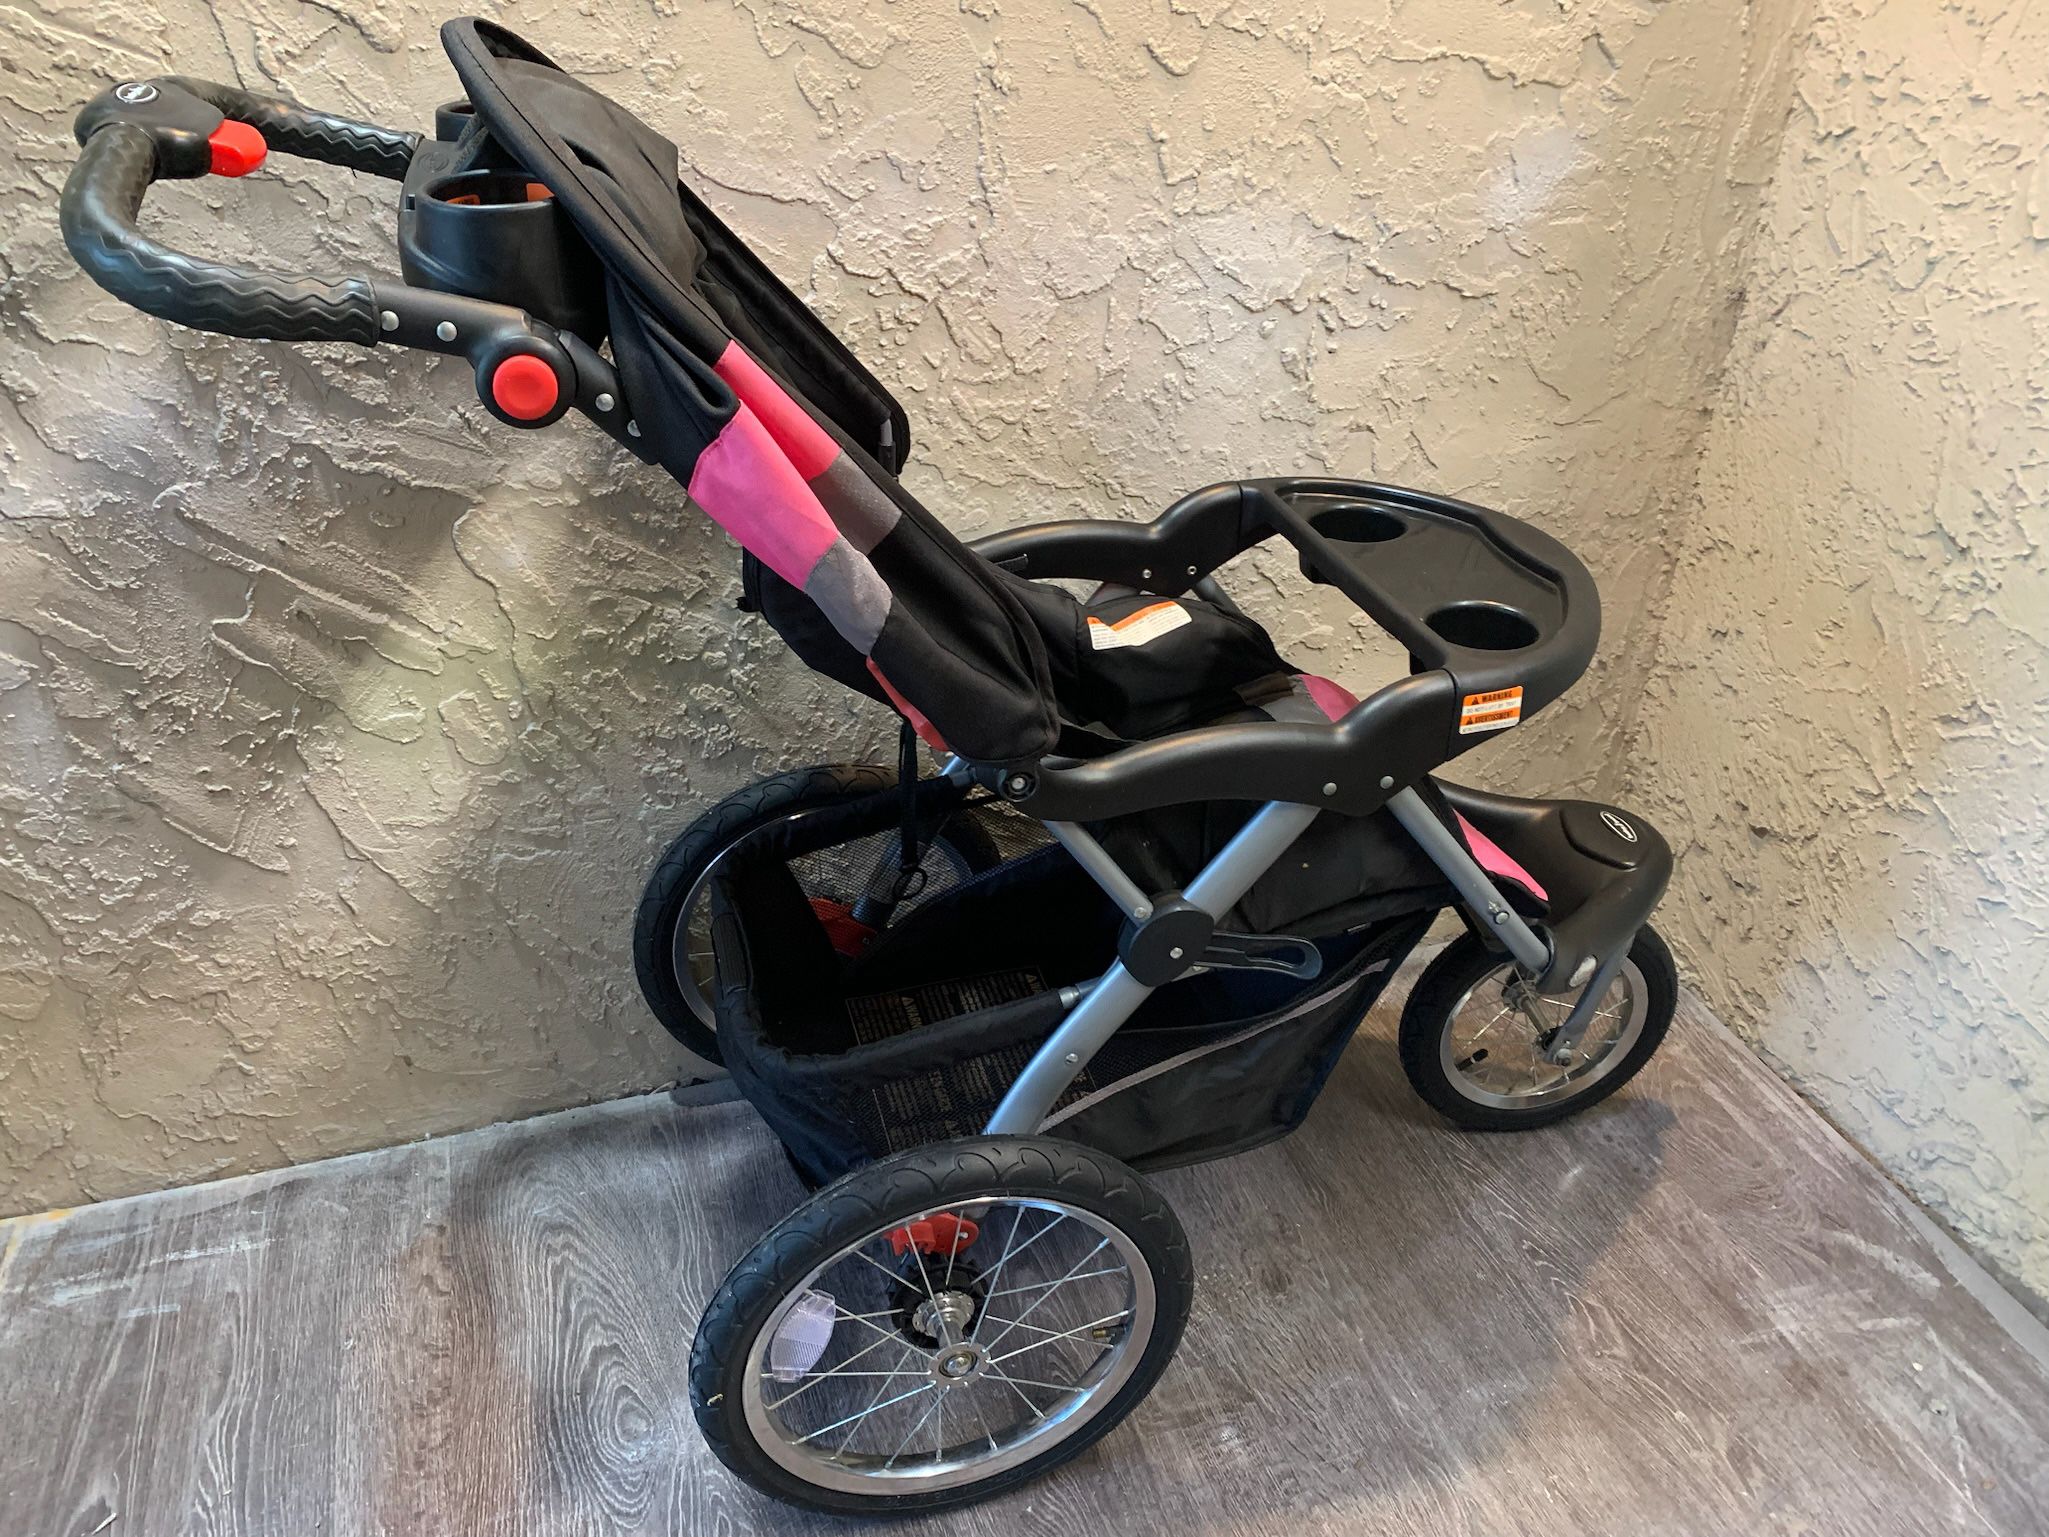 Baby Trend Expedition Jogger Jogging Stroller - See My Other Items 😃